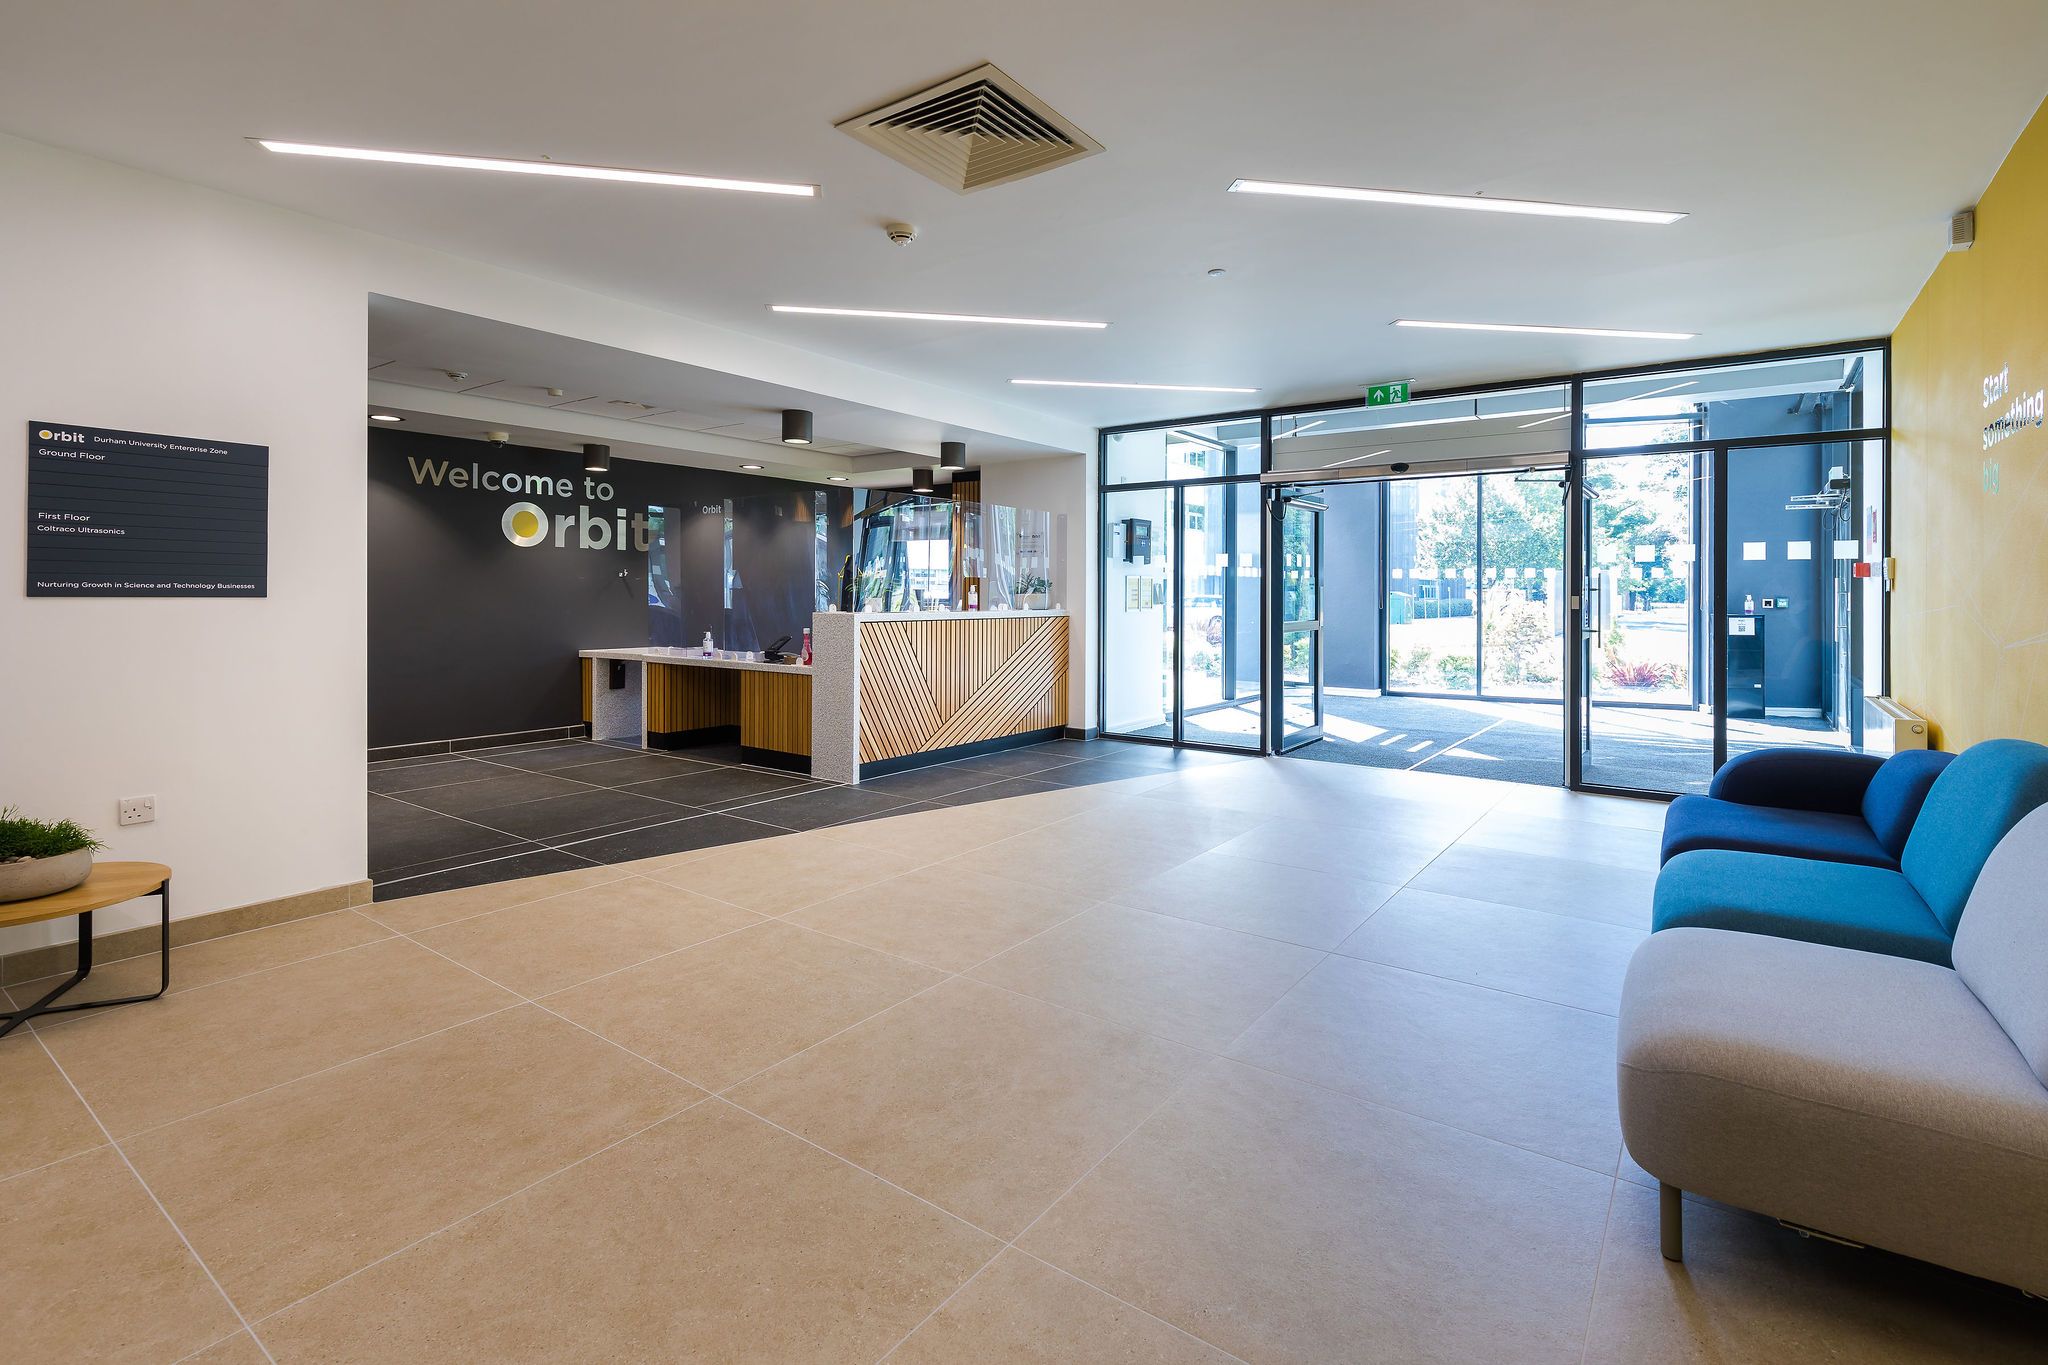 Durham University Orbit Building reception area with "Welcome to Orbit" wall display